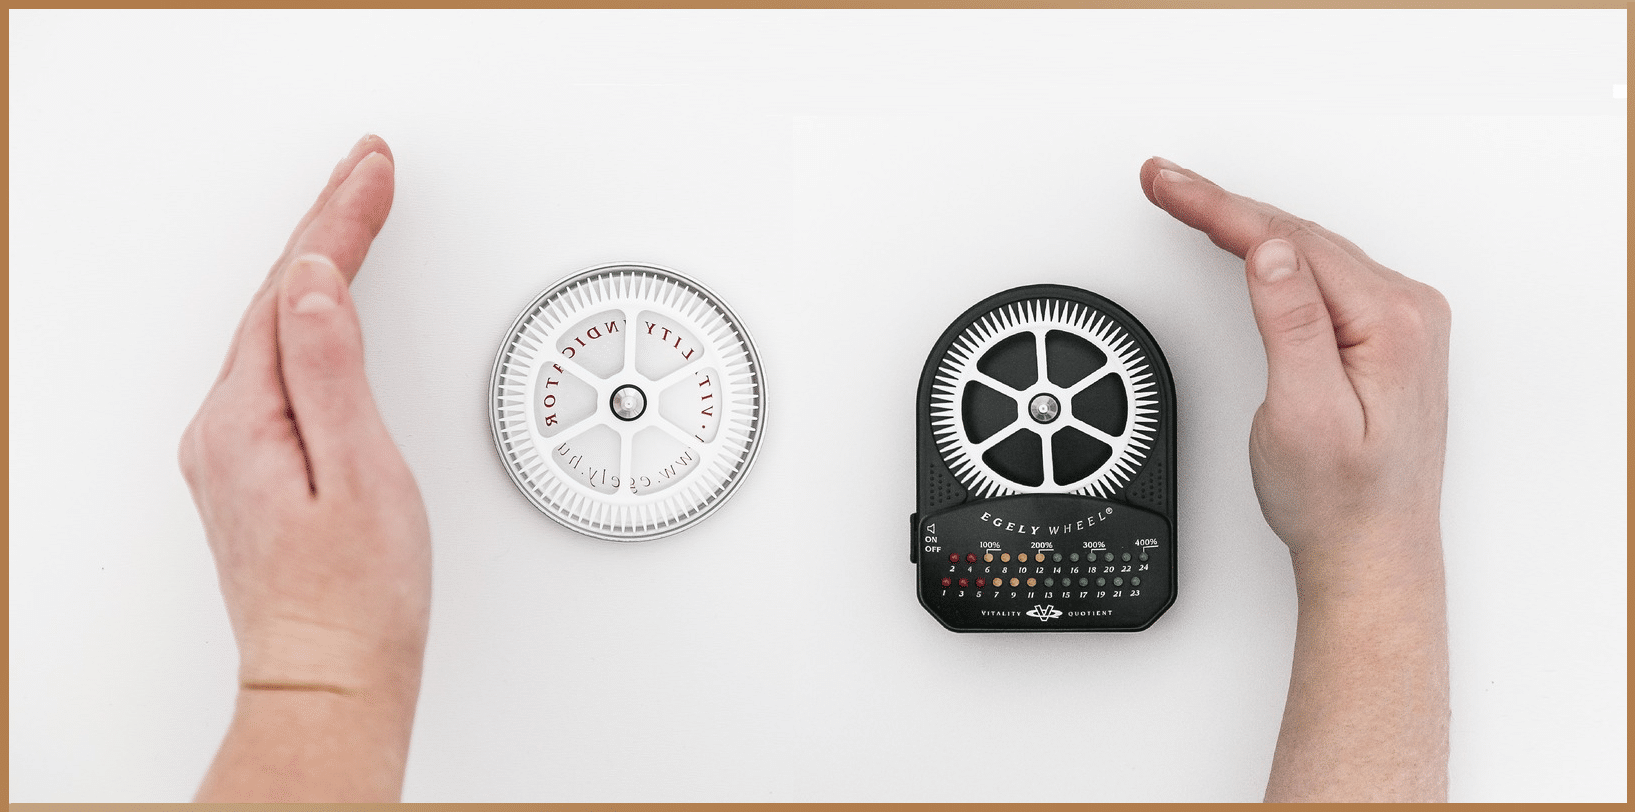 Two hands positioned next to a white Egely Wheel and a black Egely Wheel, devices for measuring life energy and psi abilities.